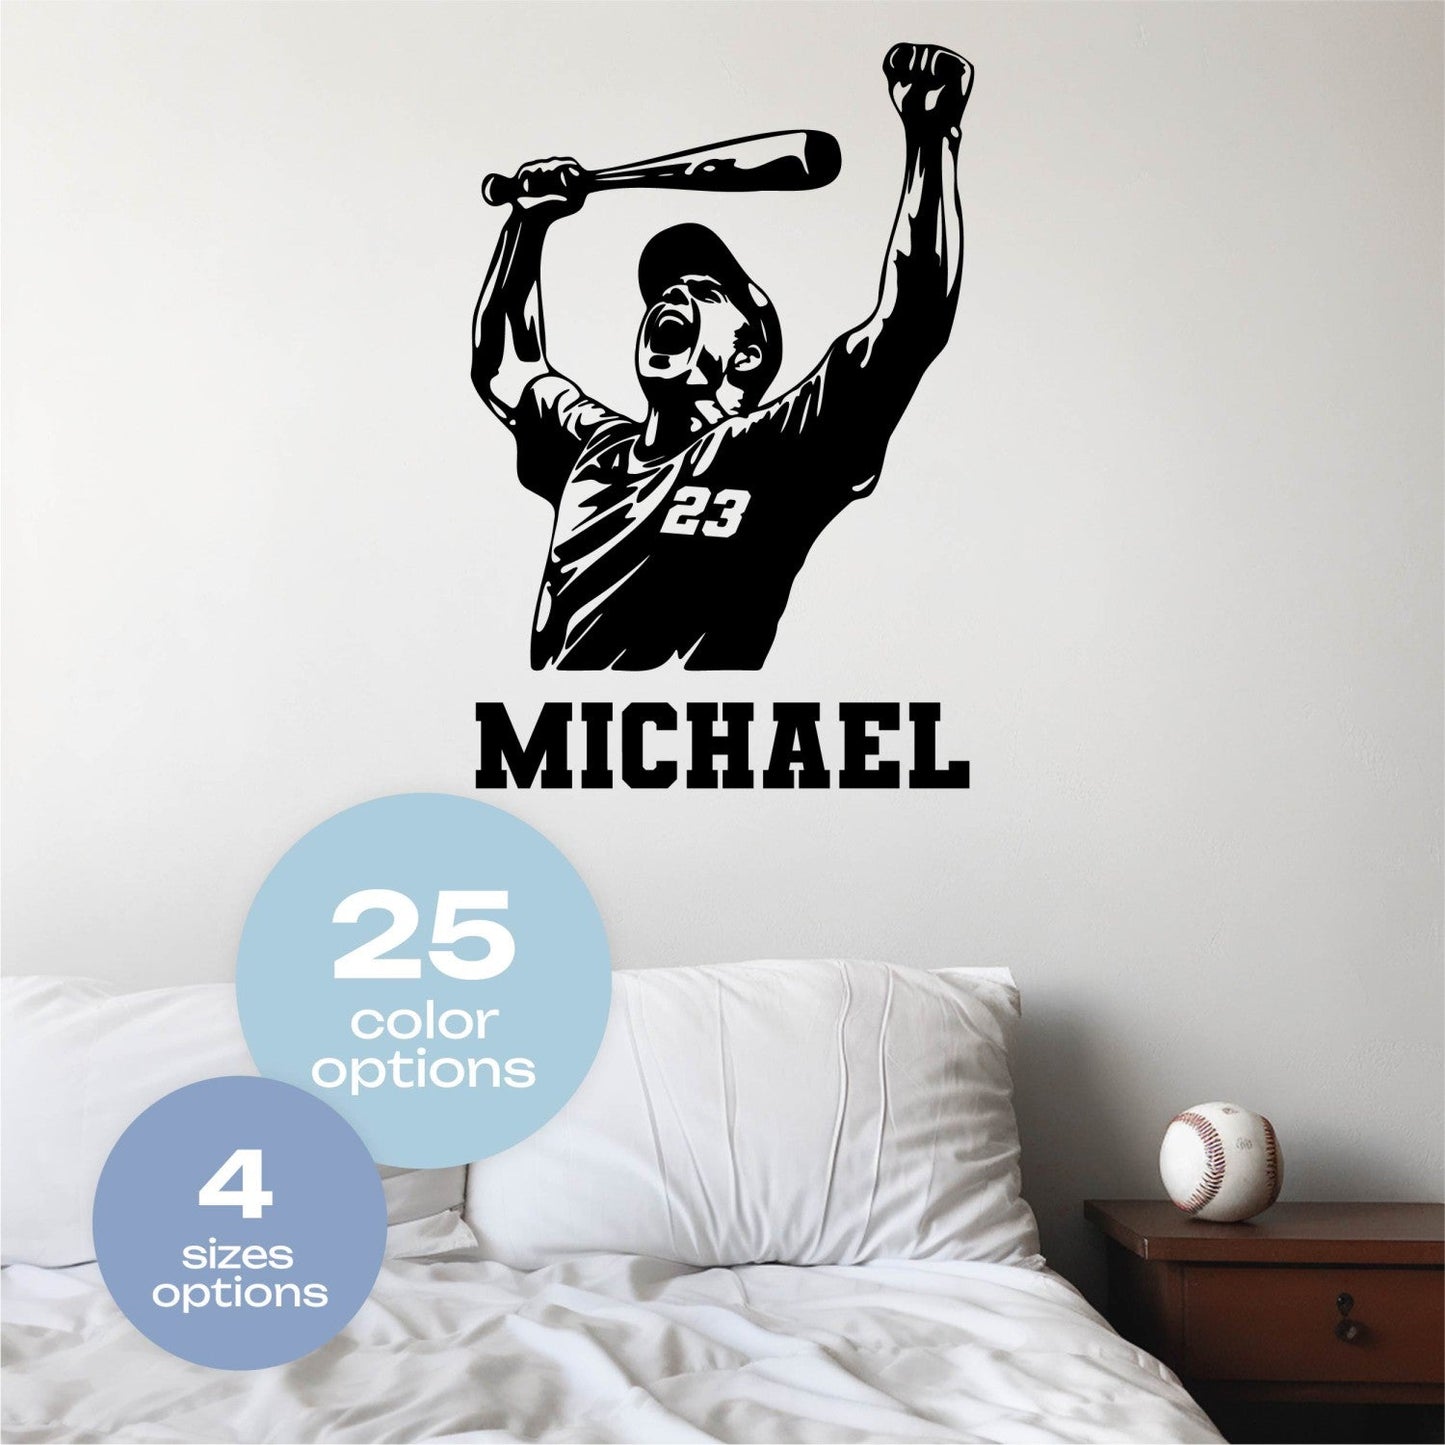 Baseball Wall Decal Personalized - Custom Baseball Name Decal - Custom Baseball Player Wall Decal - Sports Wall Decals for Boys Room